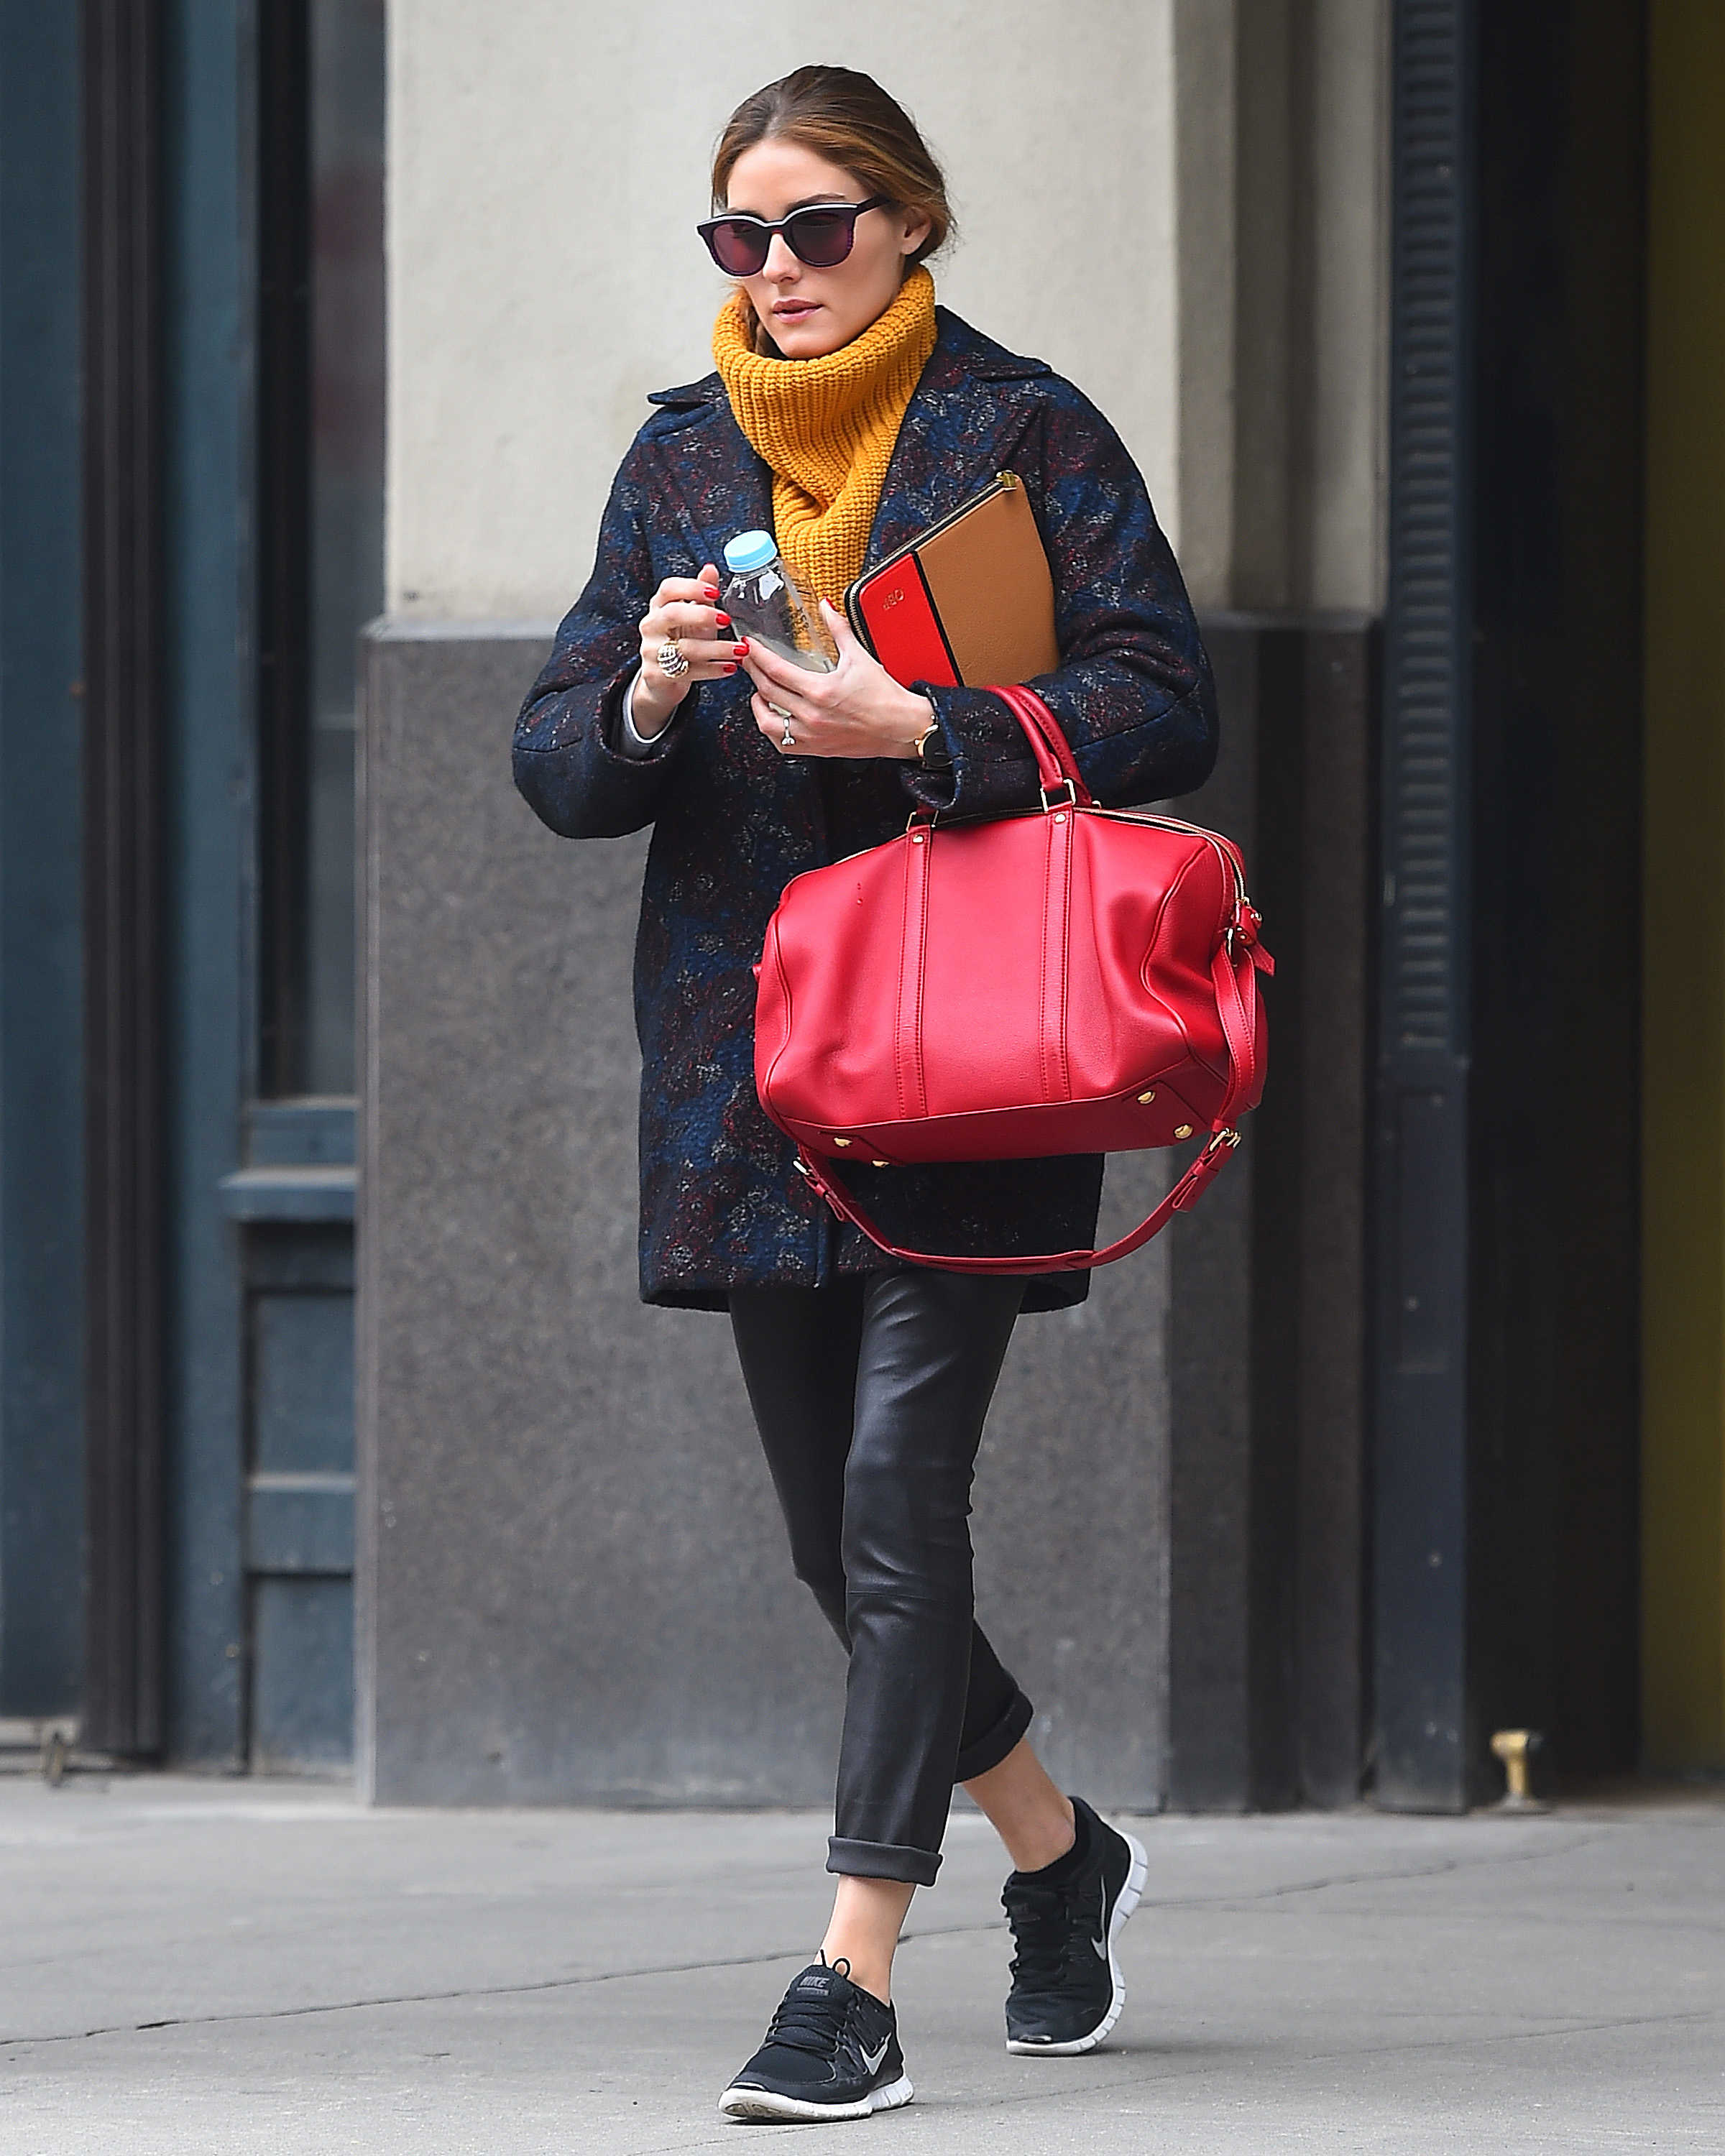 Olivia Palermo out and about in NYC